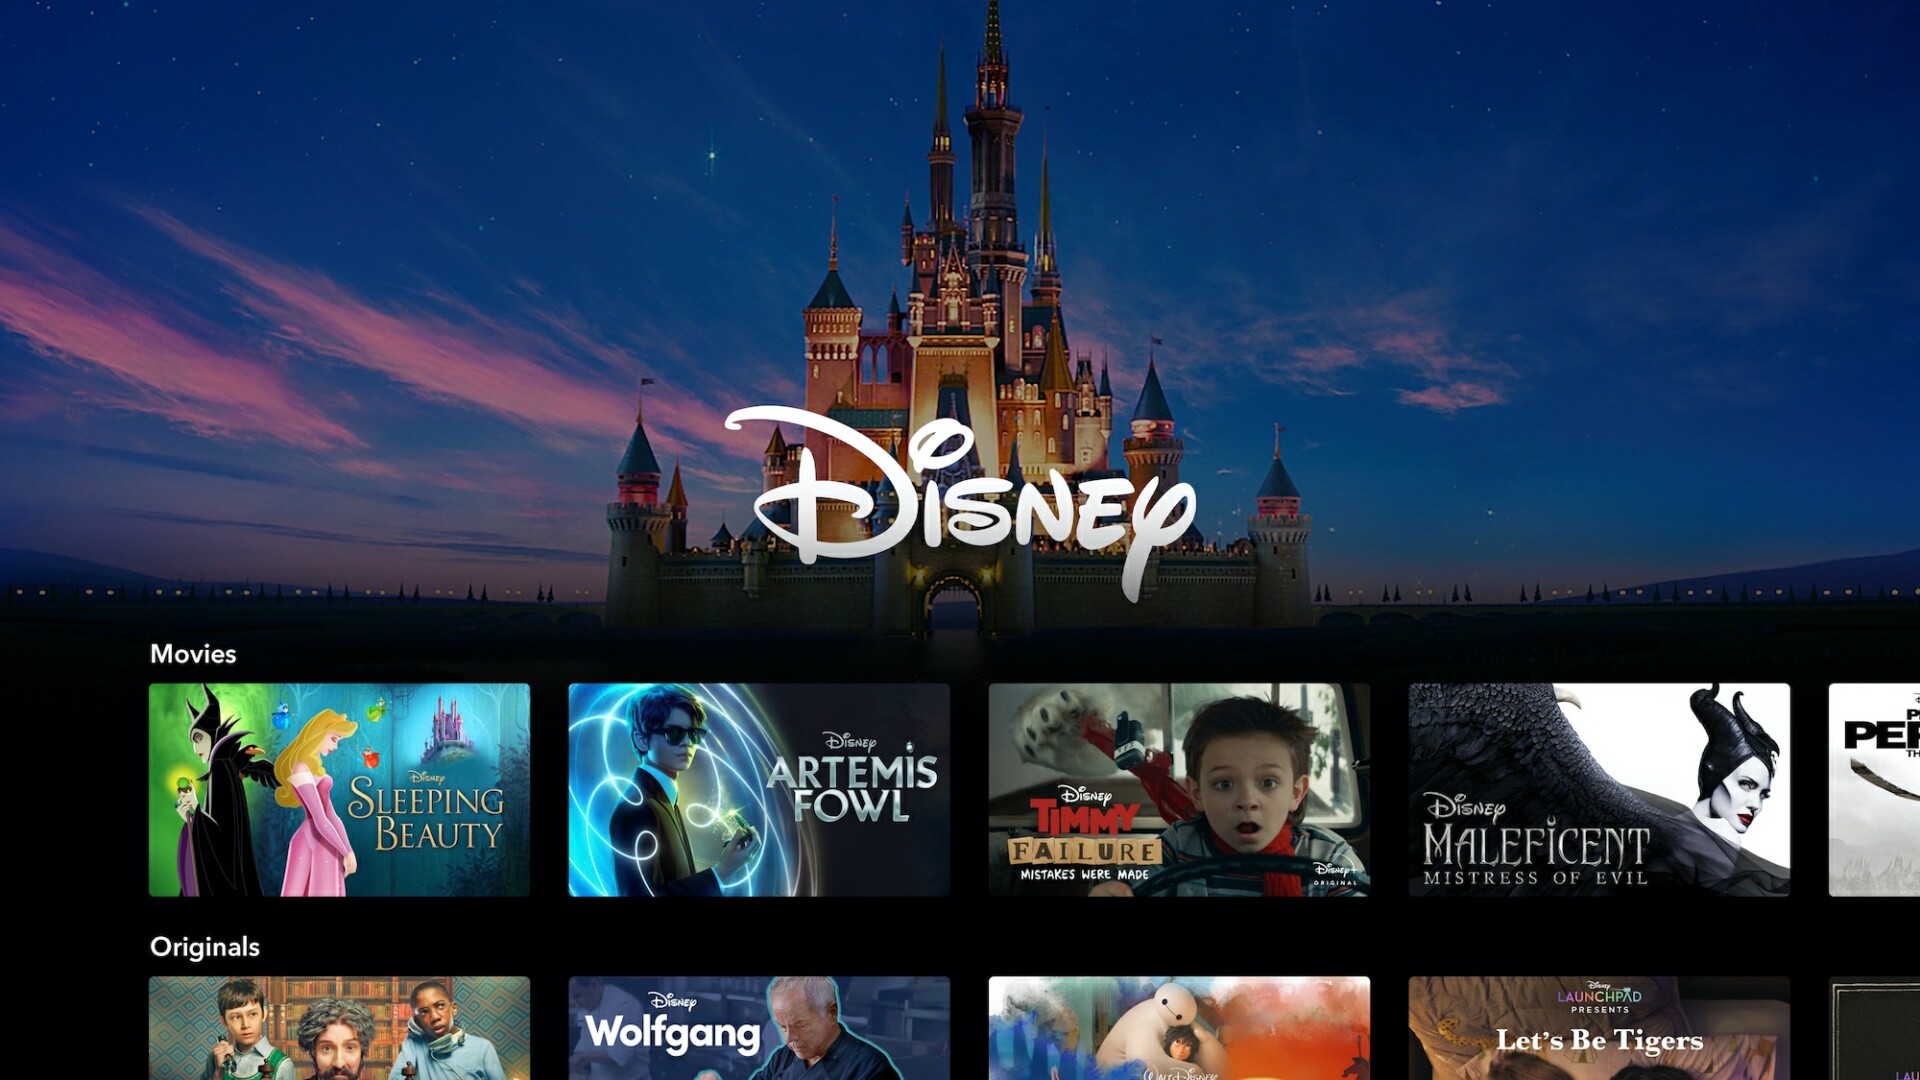 Top 5 Shows on Disney+